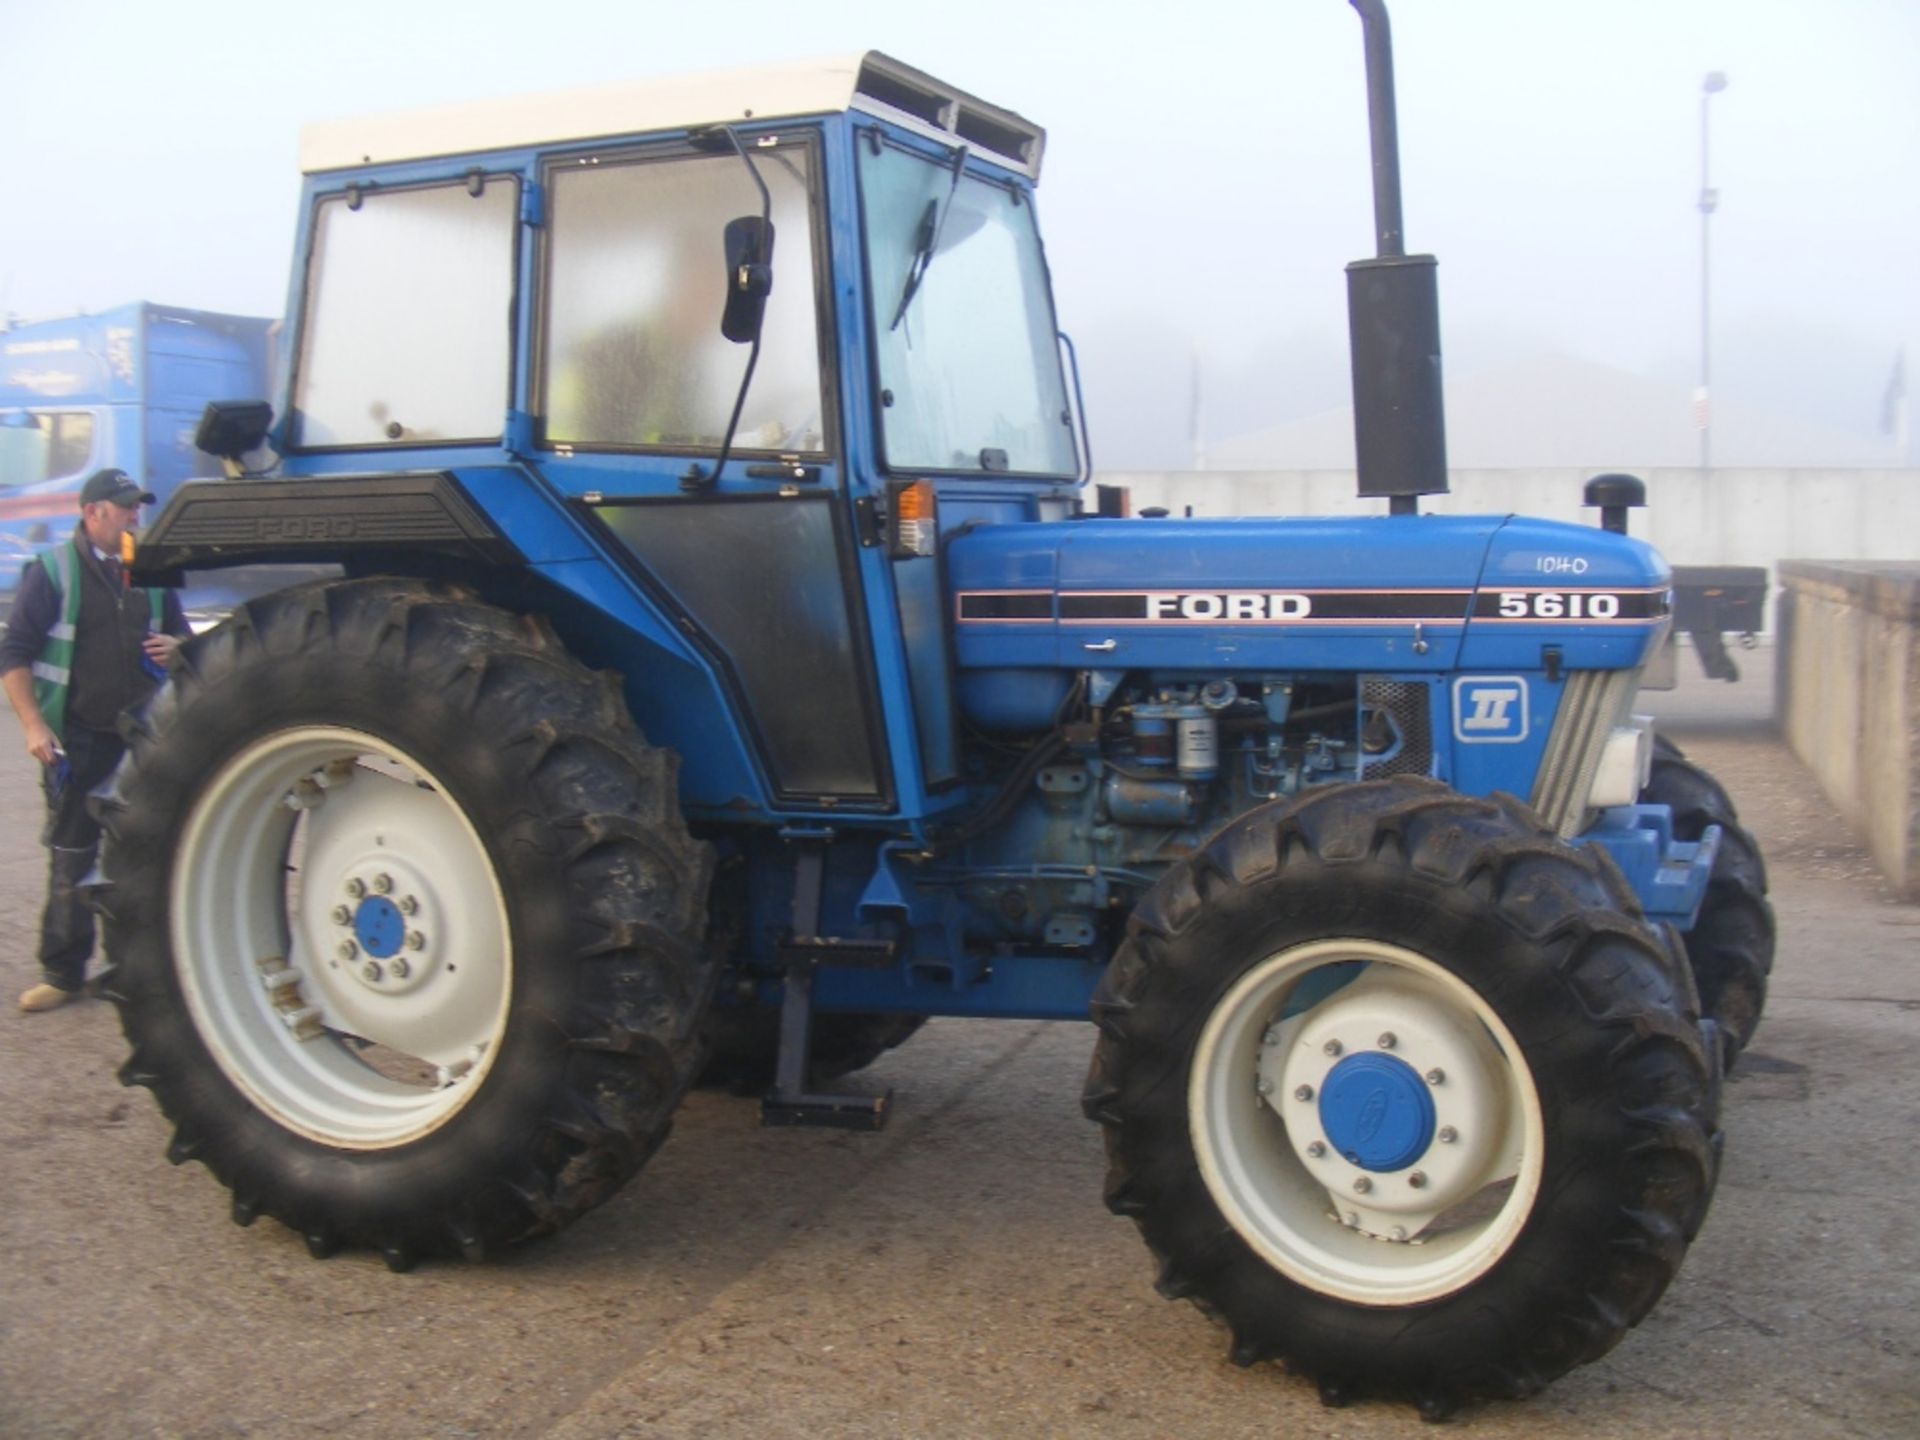 Ford 5610 Force II 4wd Tractor with AP Cab - Image 4 of 6